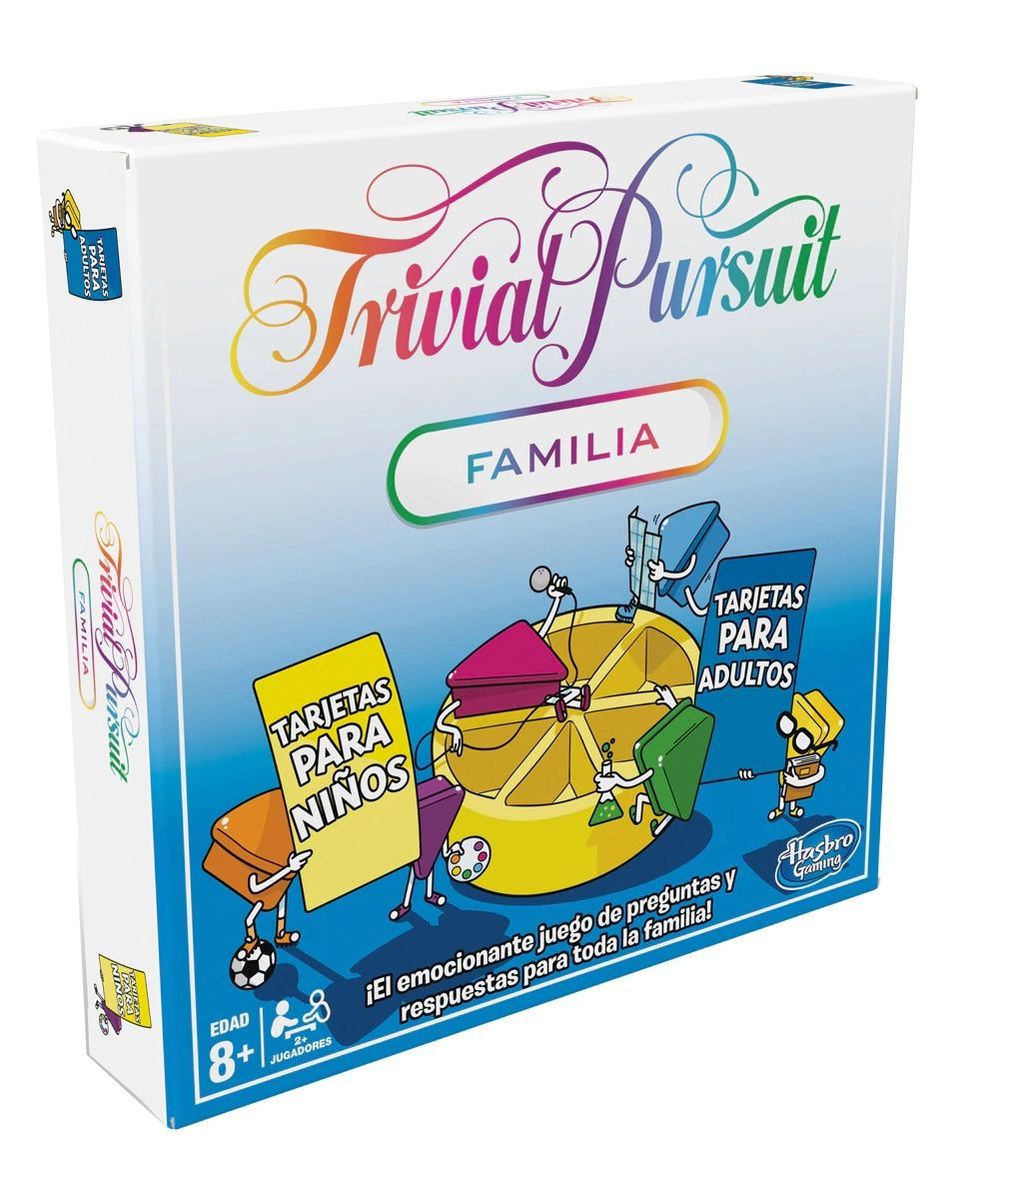 The Trivial Pursuit Family